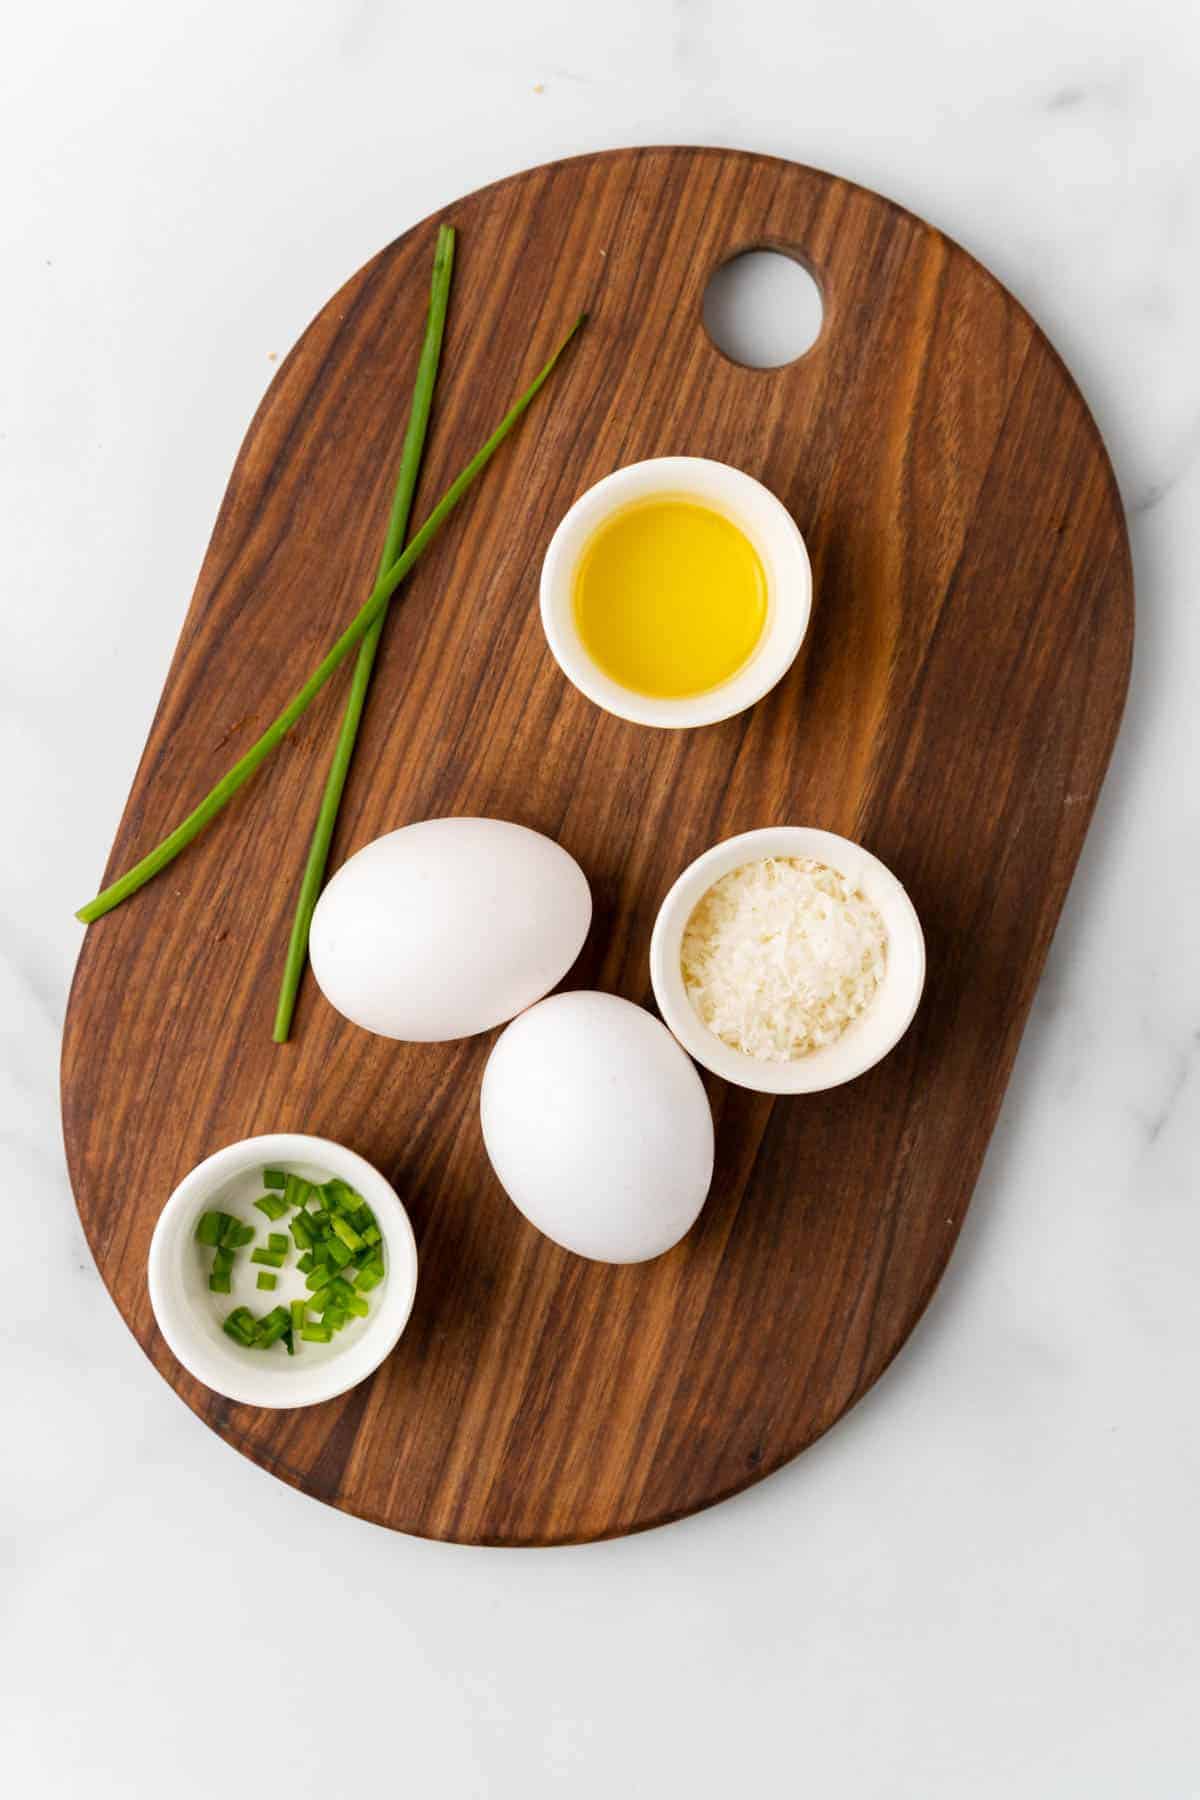 Ingredients in separate bowls and ramekins on a wooden serving tray on a white marble countertop, as seen from above